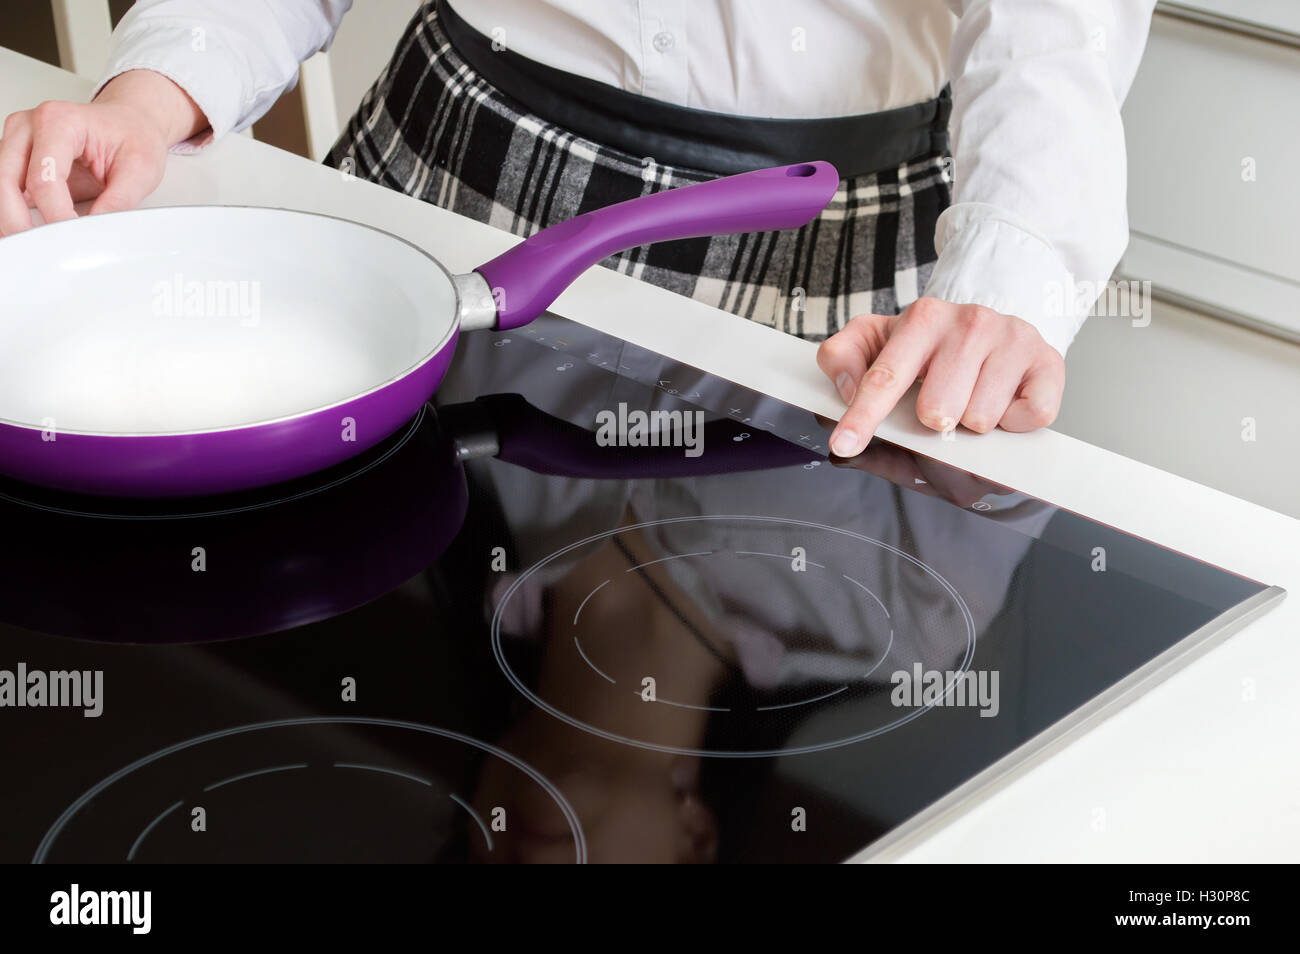 A woman is turning on induction hob. Stock Photo